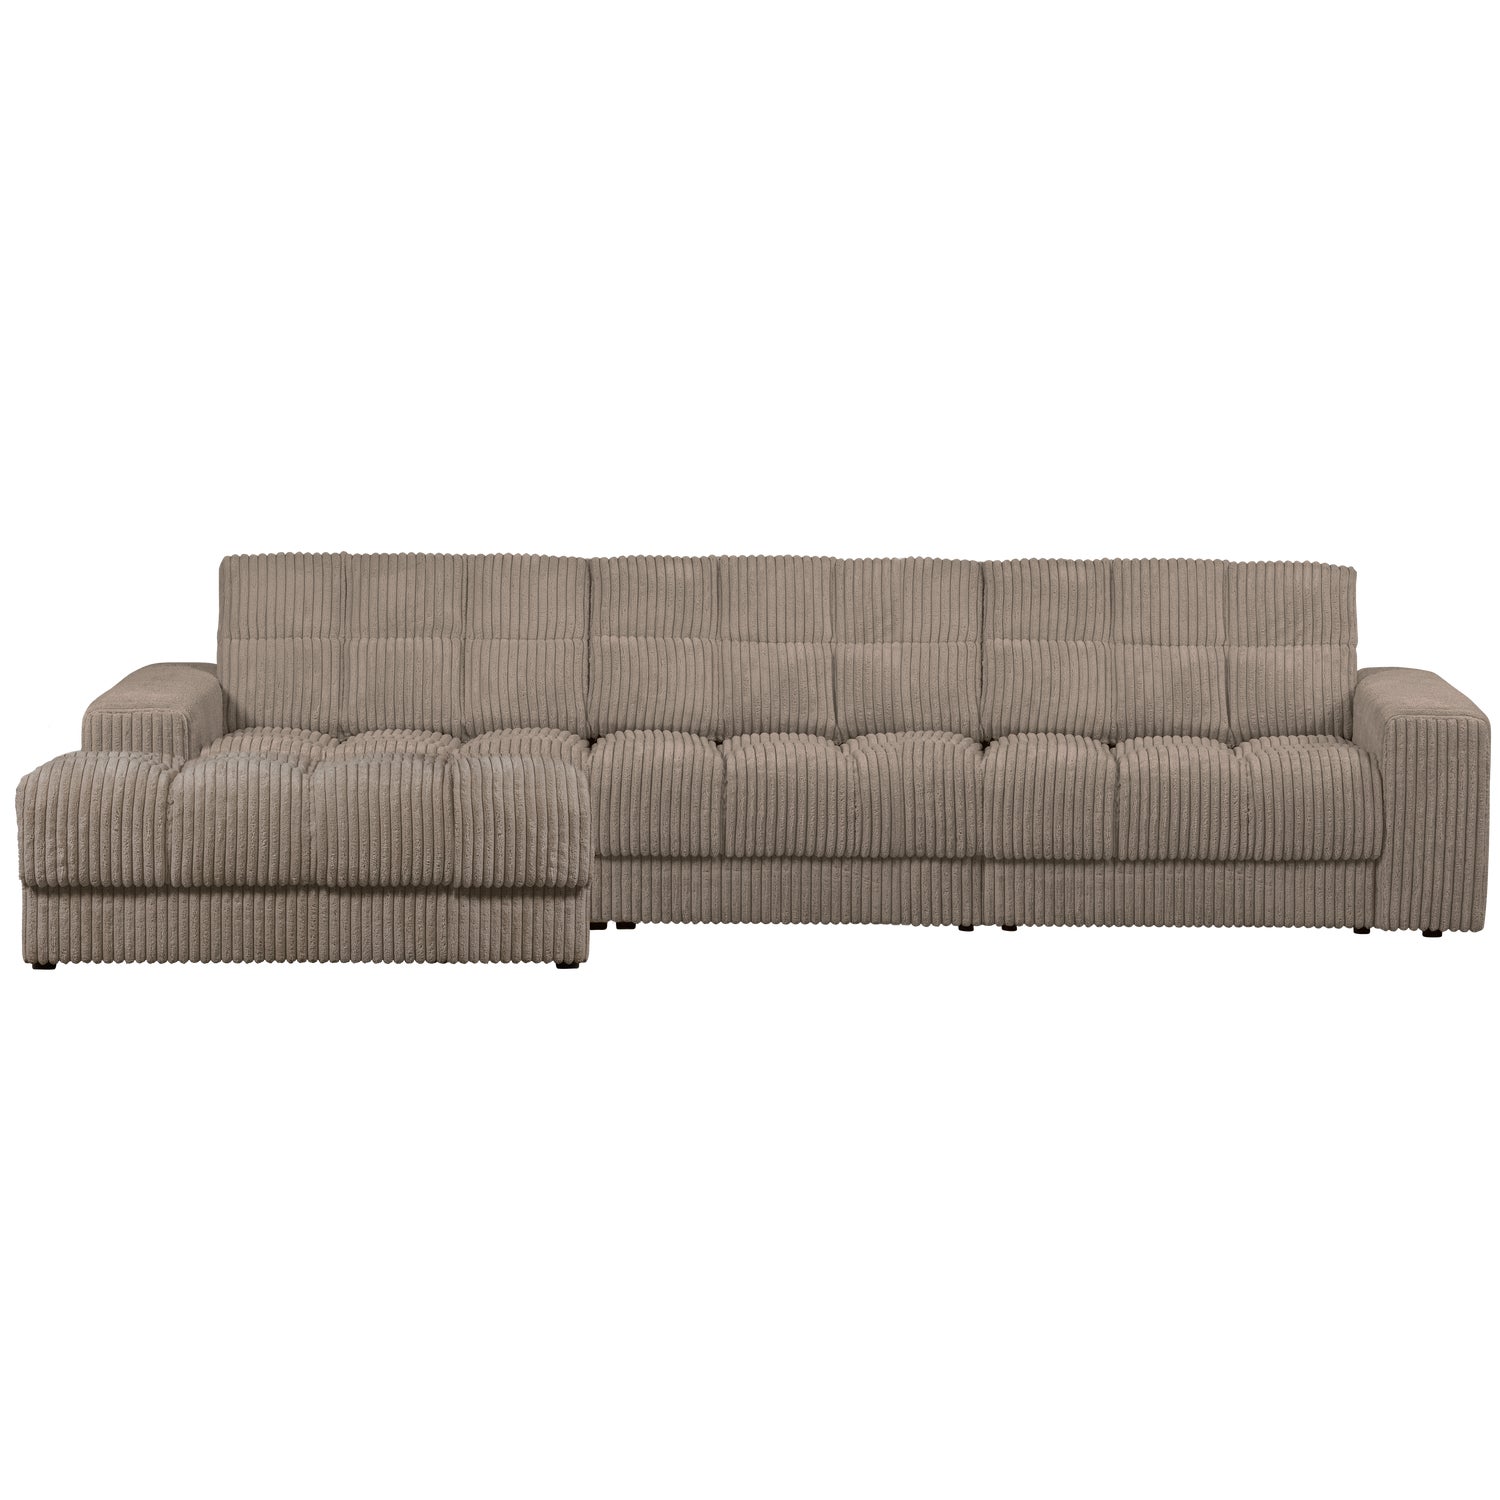 379012-RM-01_VS_WE_Second_date_chaise_longue_links_grove_rinstof_mud.png?auto=webp&format=png&width=1500&height=1500